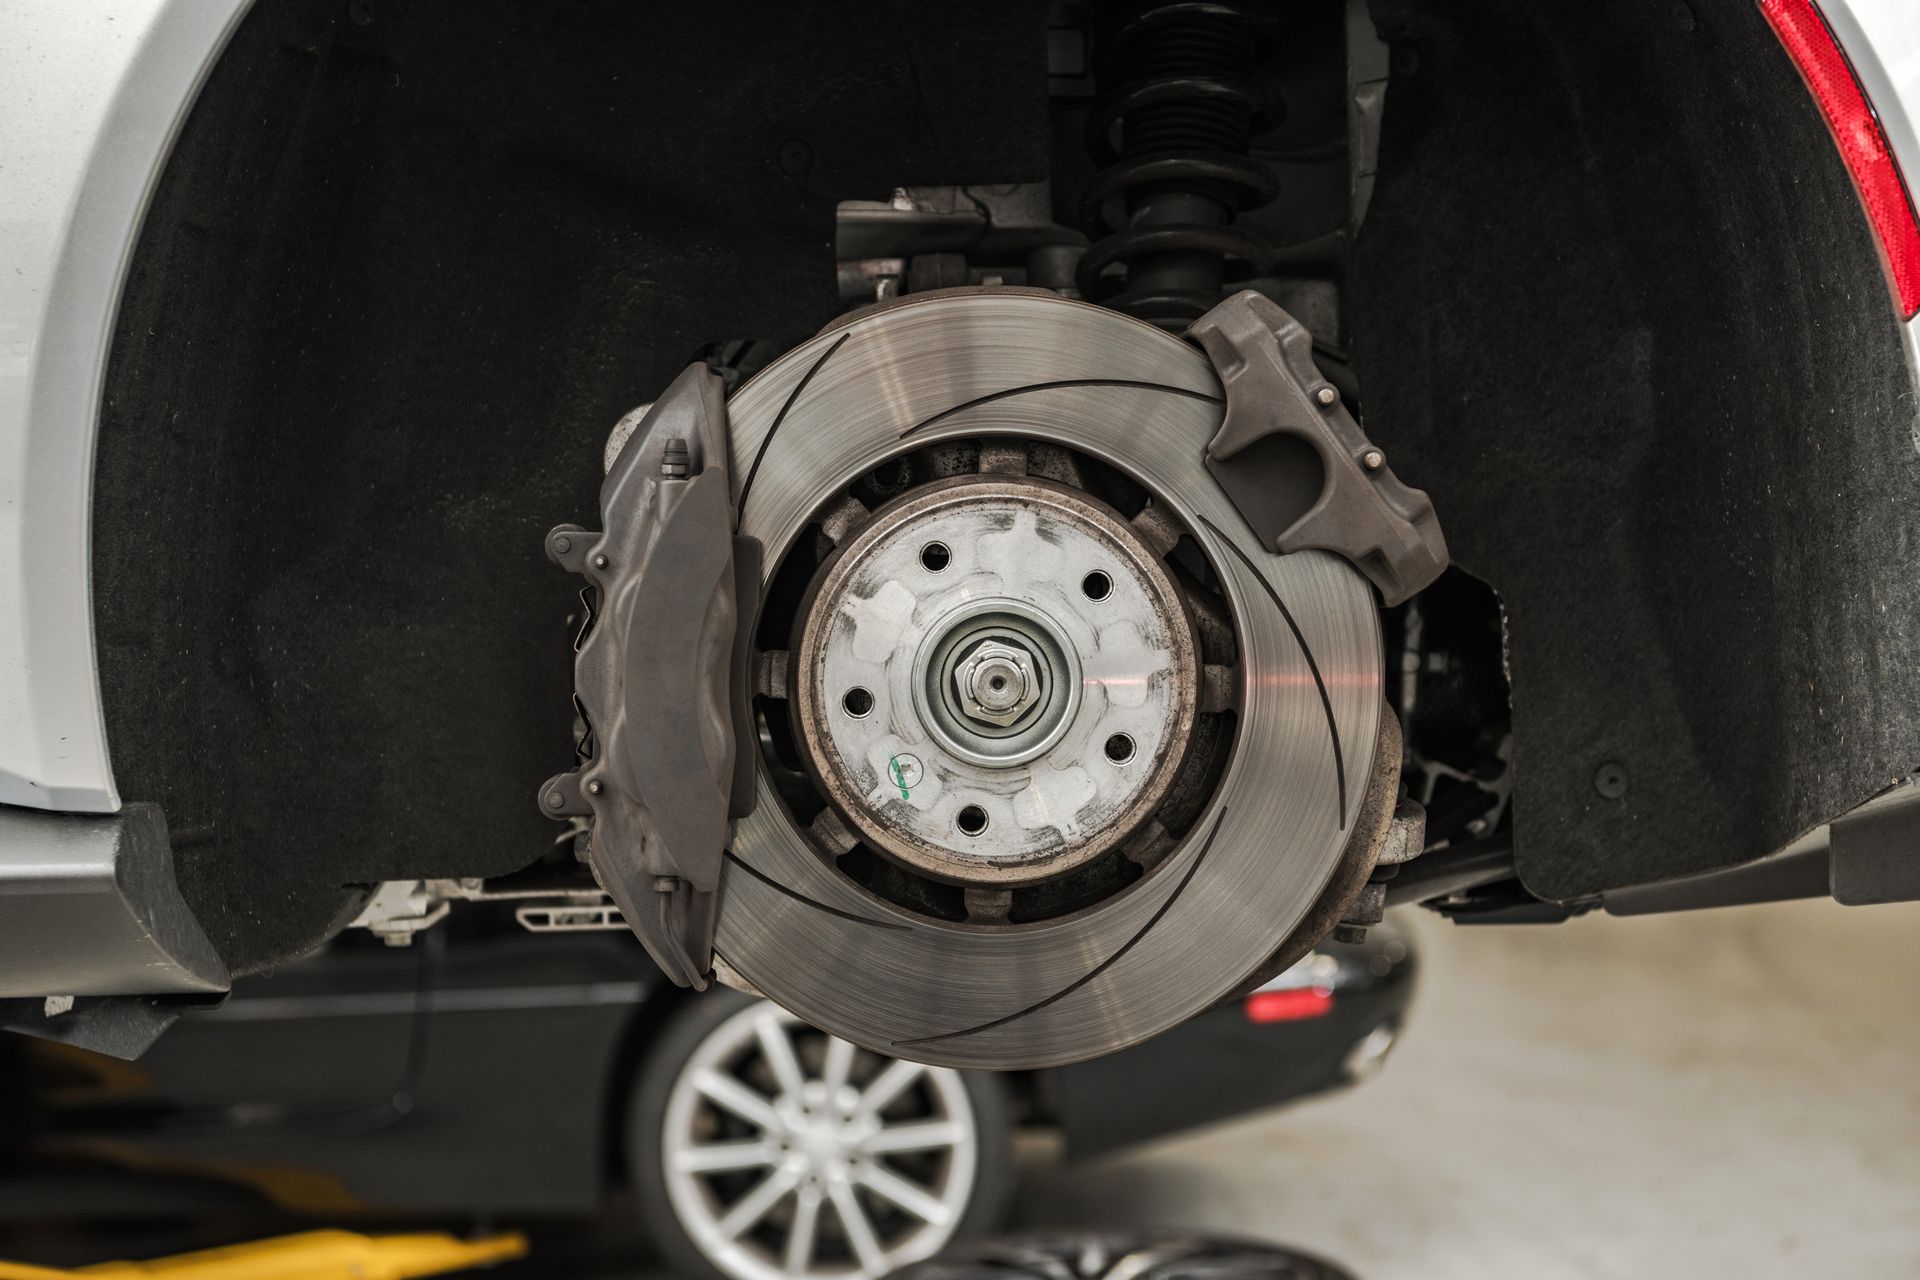 Brake Pads 101 - Function, Types, and Maintenance | Global Auto Care
